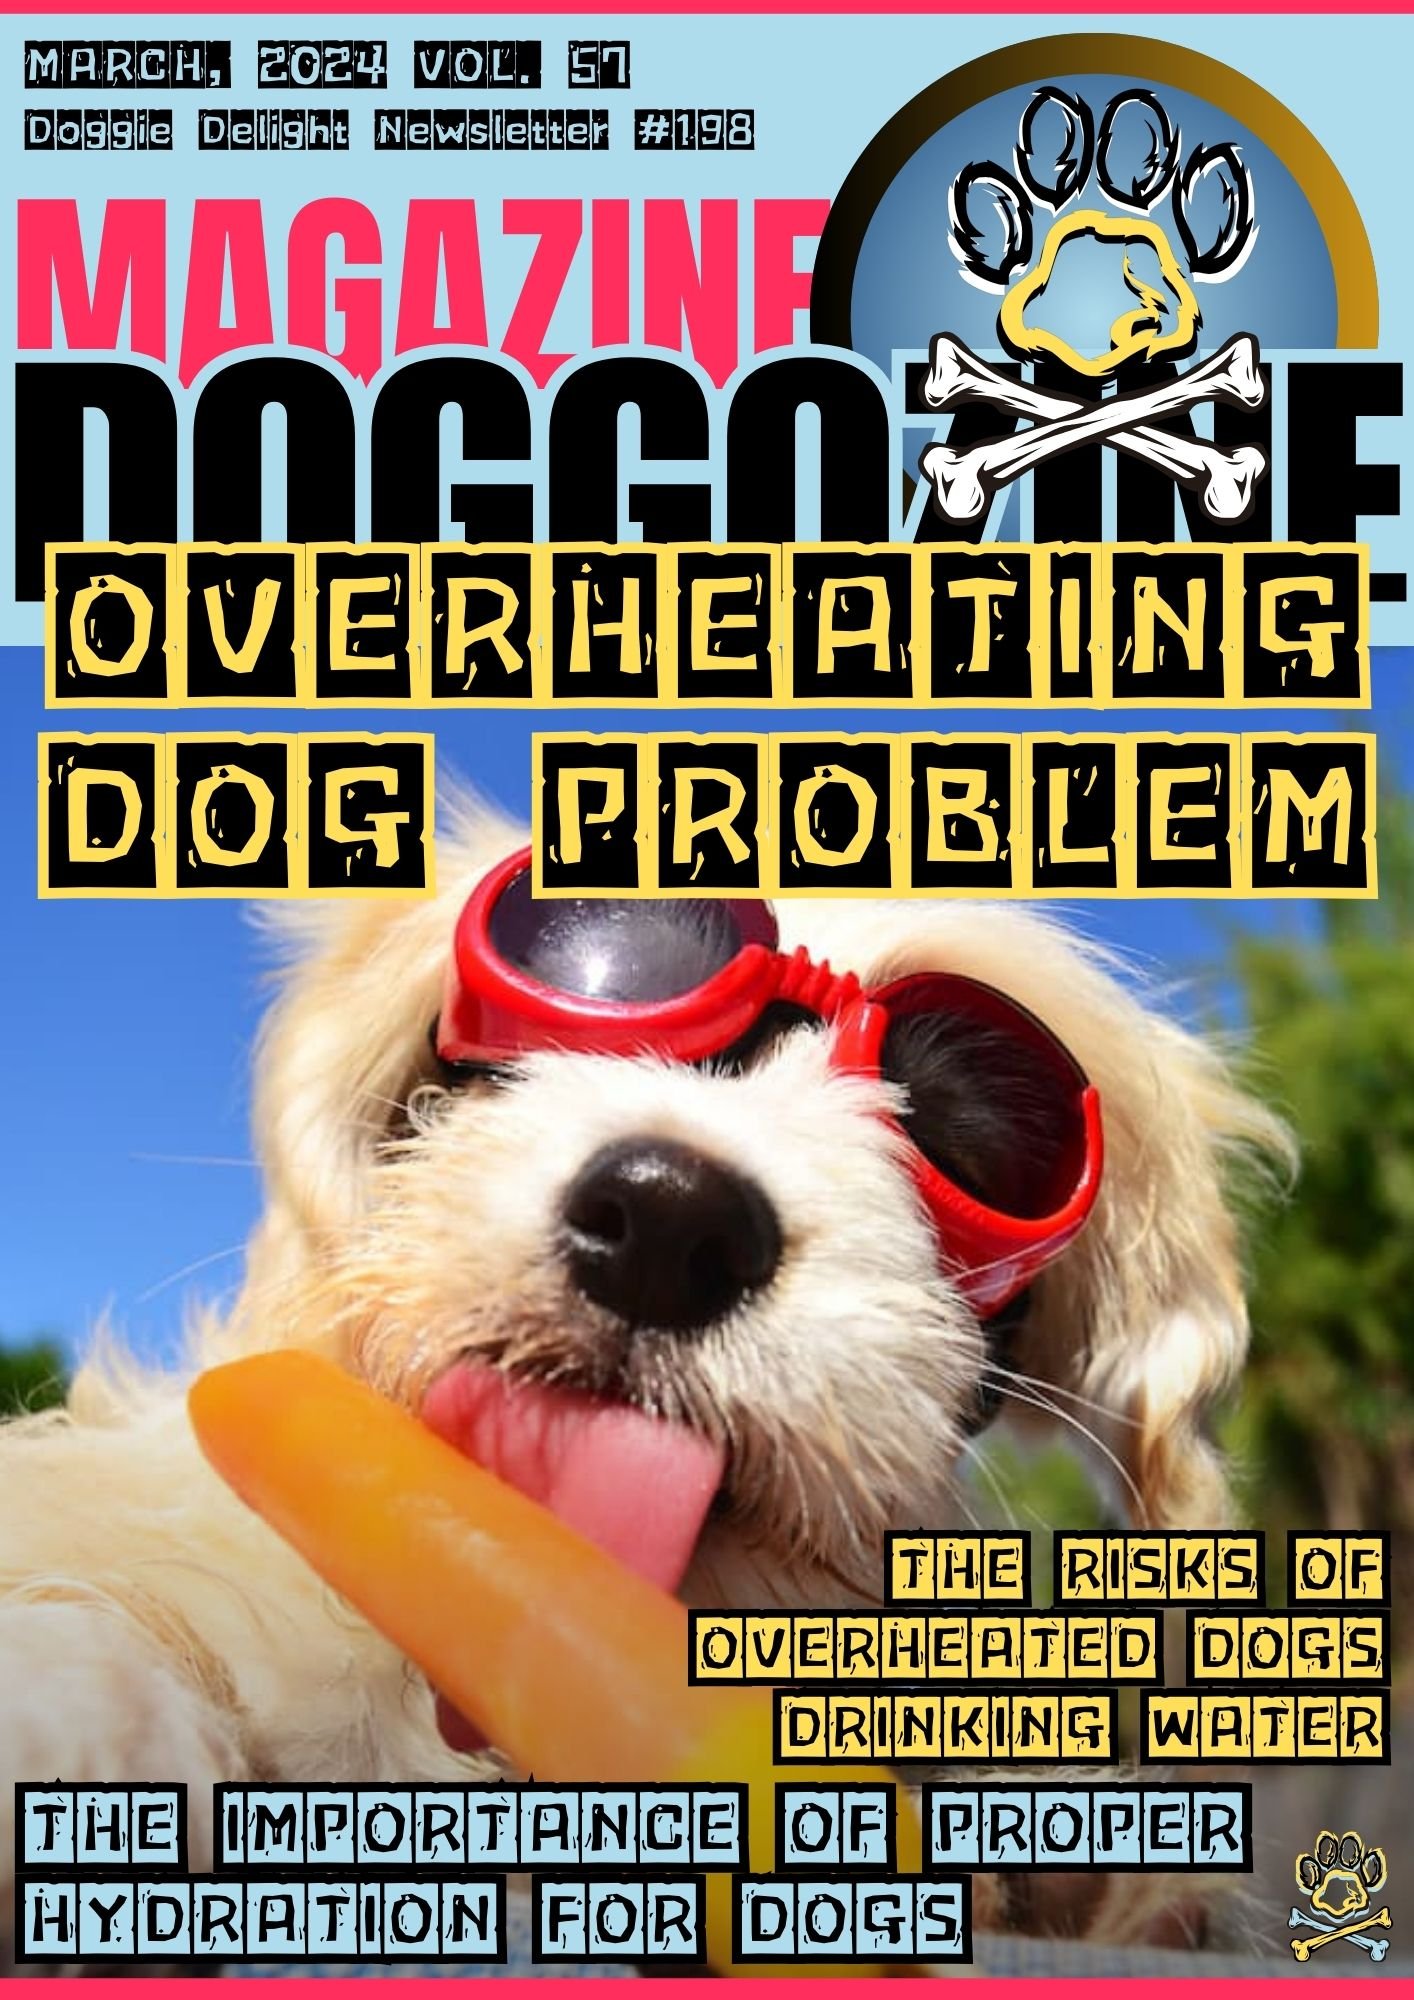 OVERHEATING IN DOGS